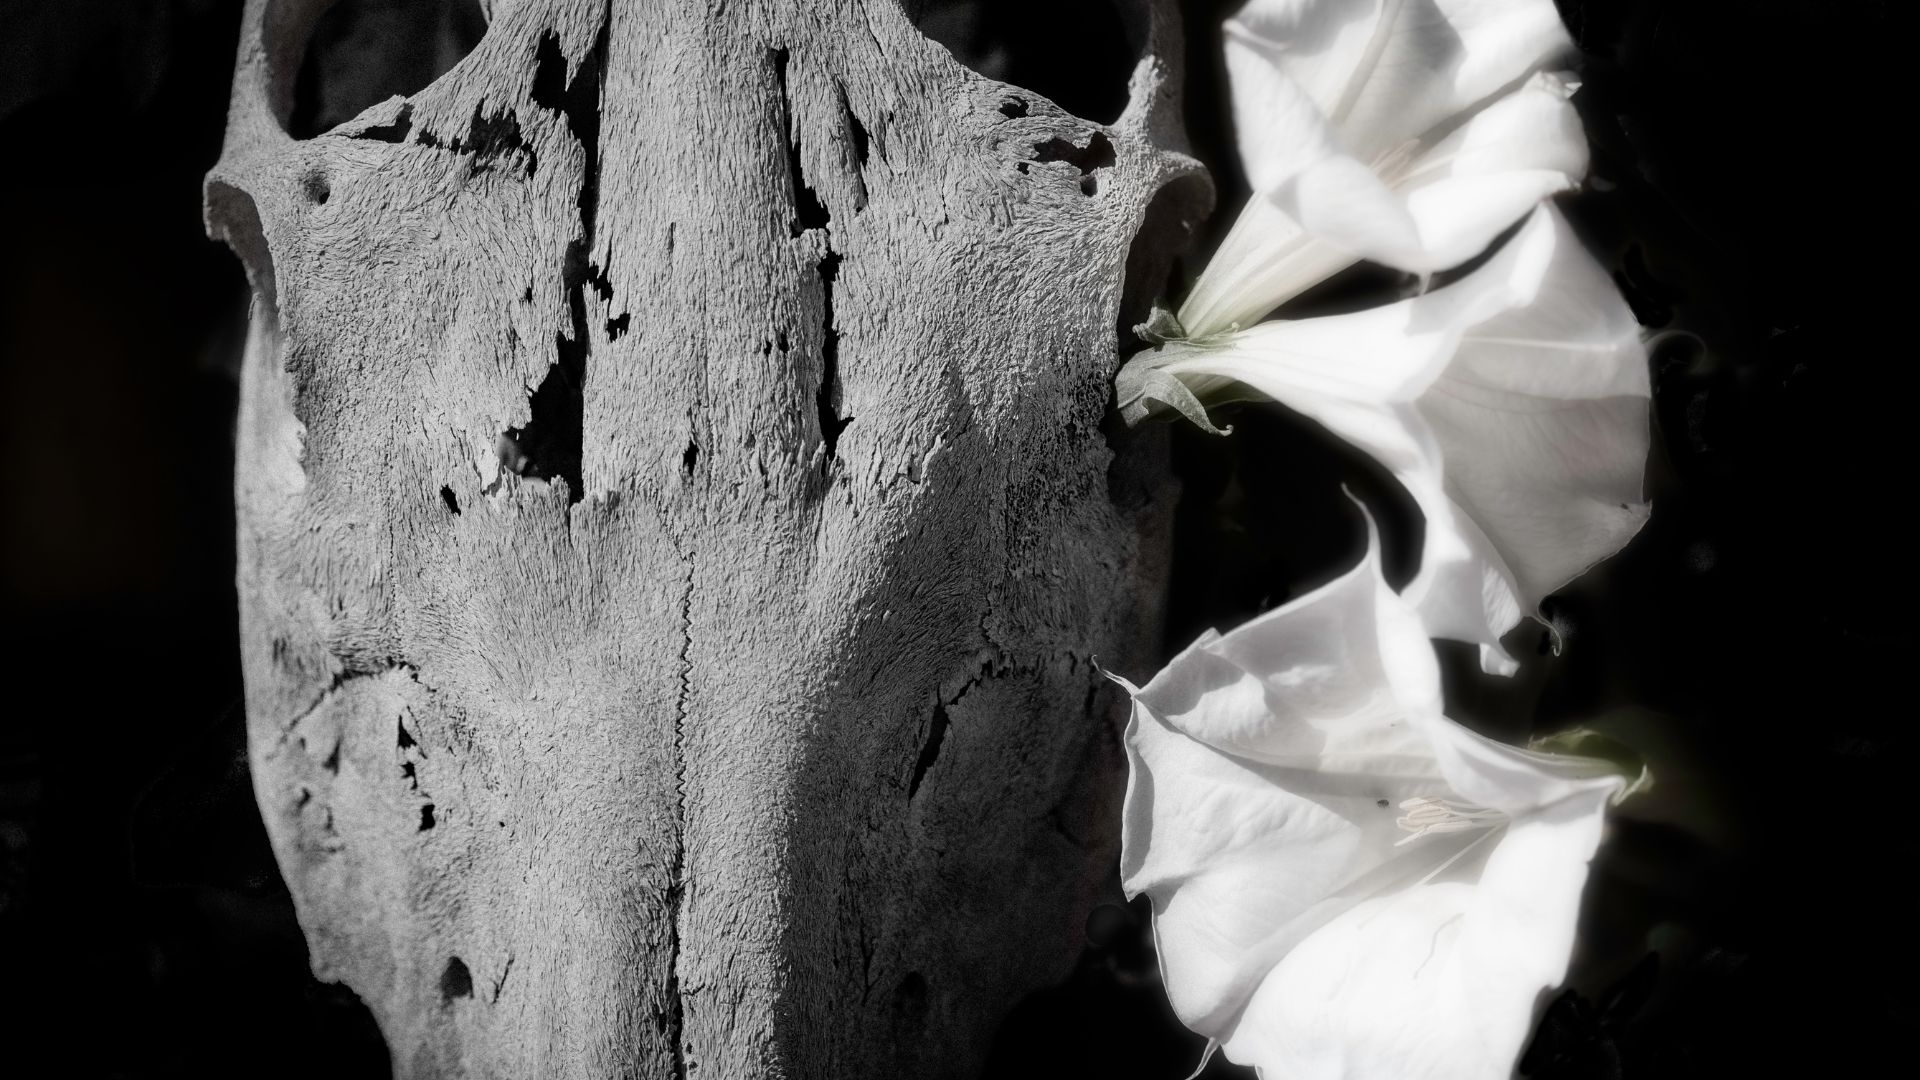 Black and white photograph of animal skull with white flowers attached